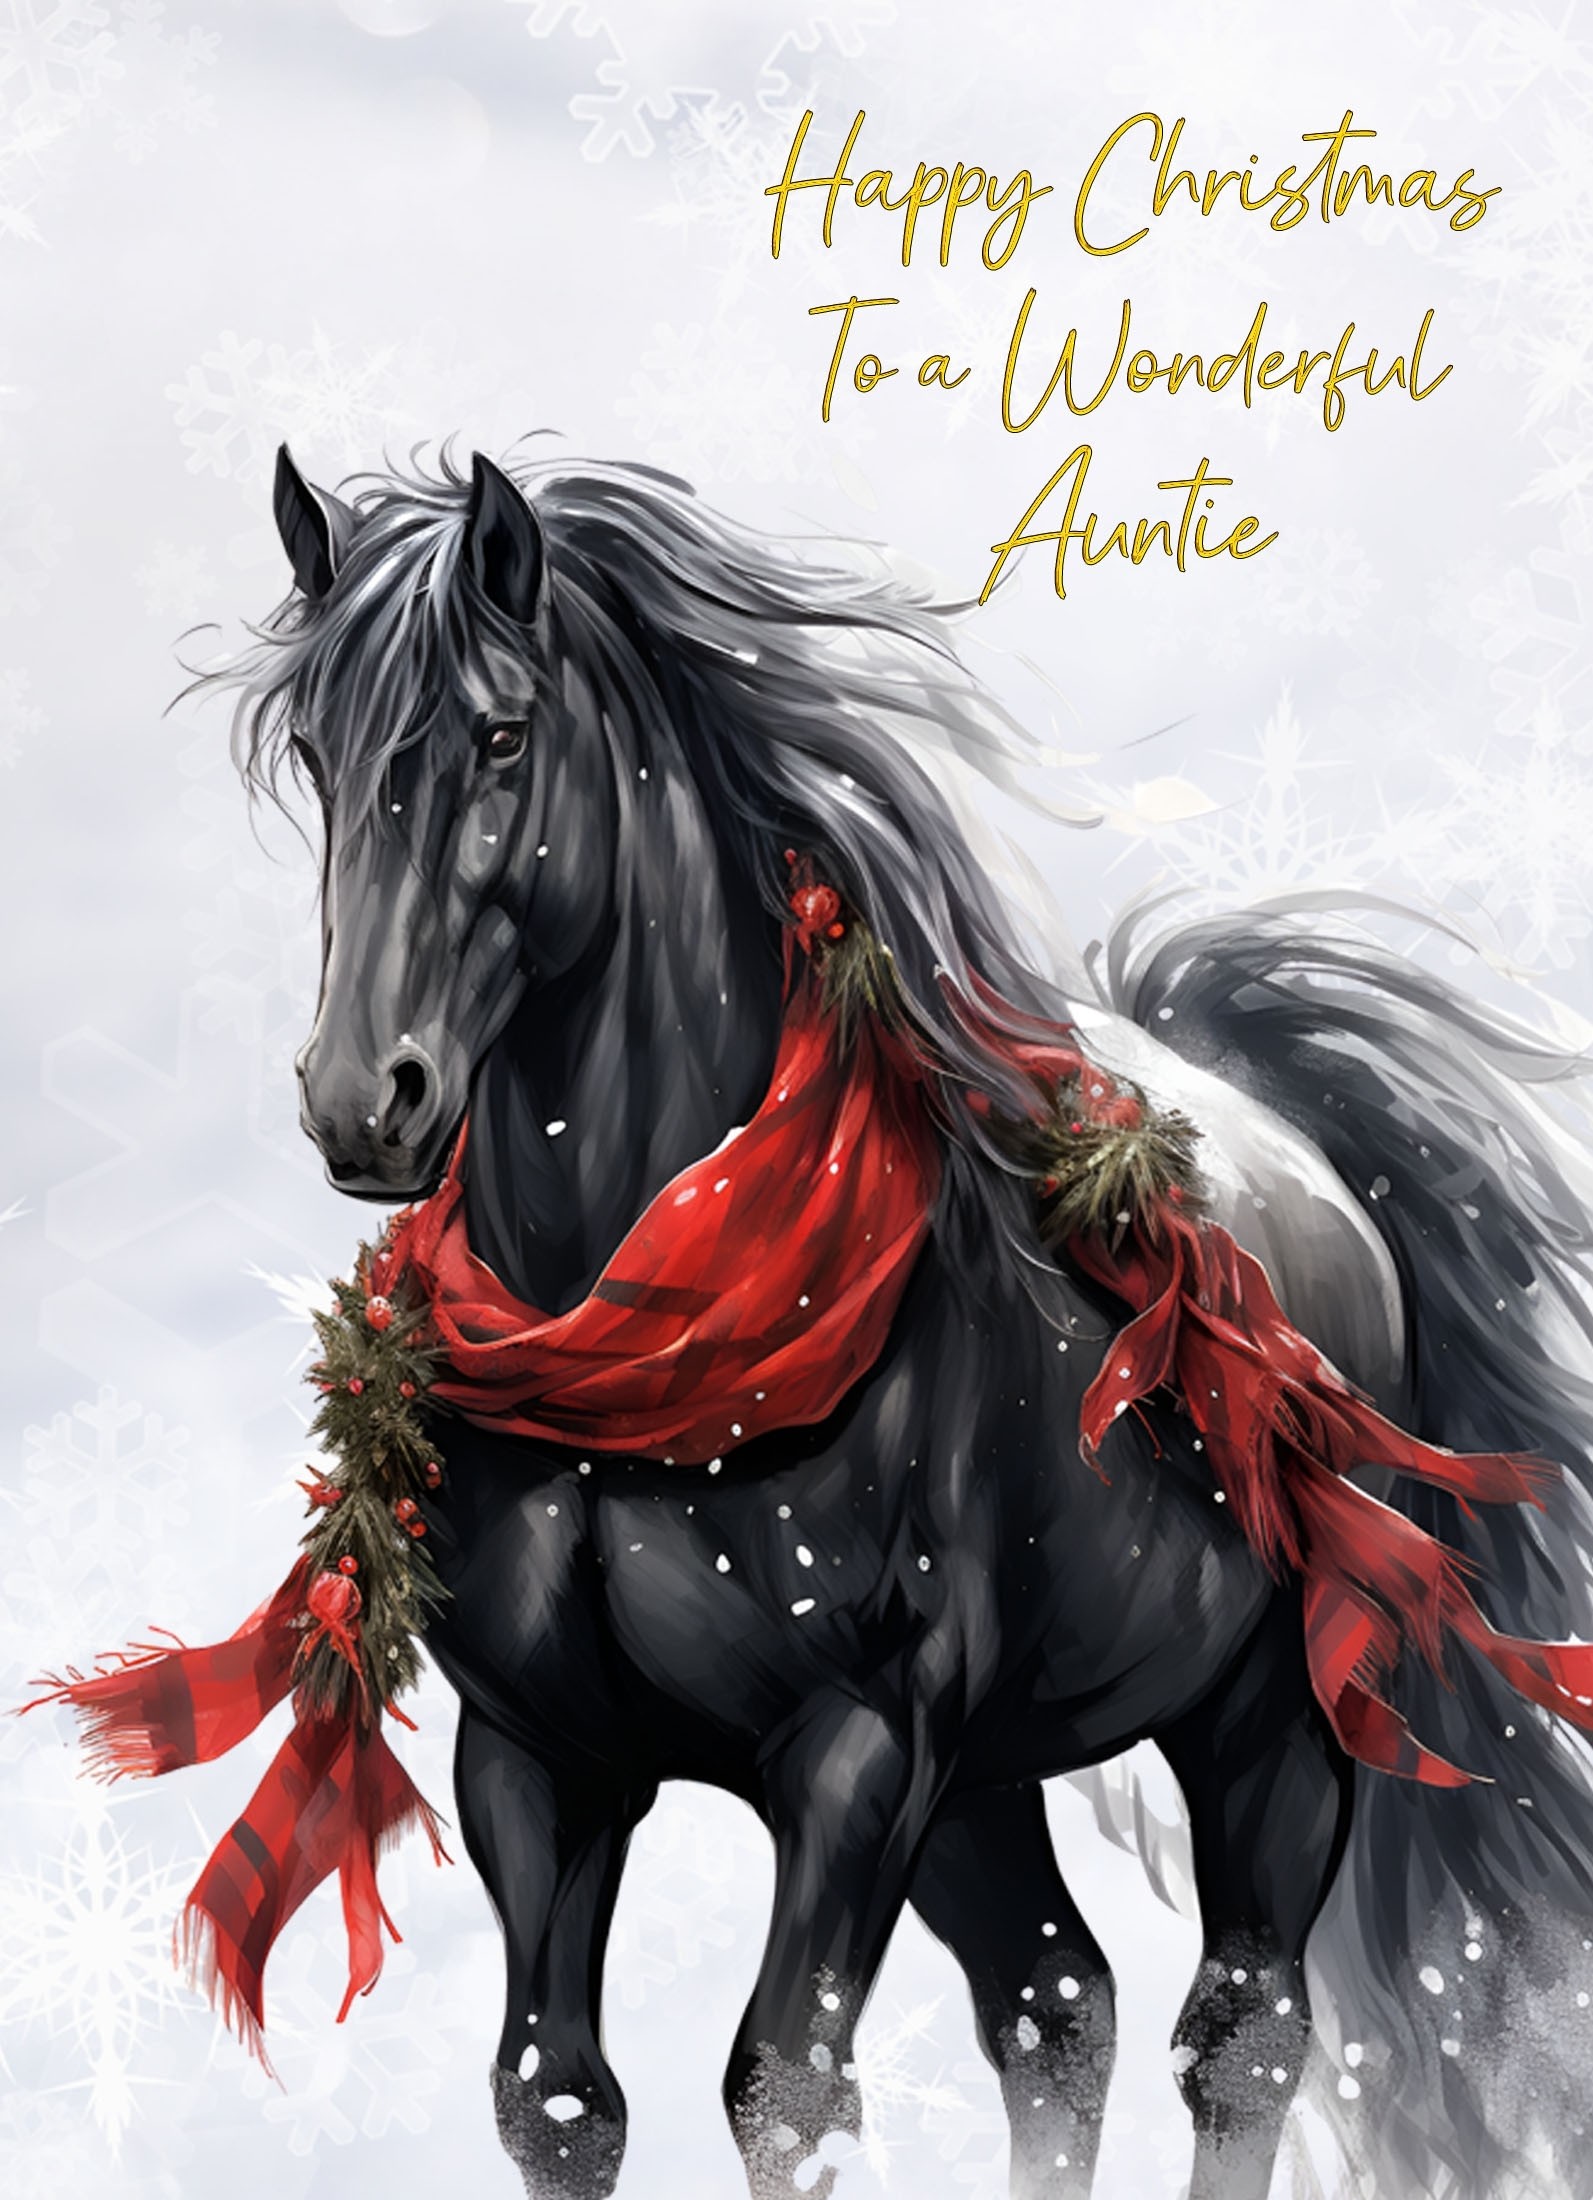 Christmas Card For Auntie (Horse Art Black)